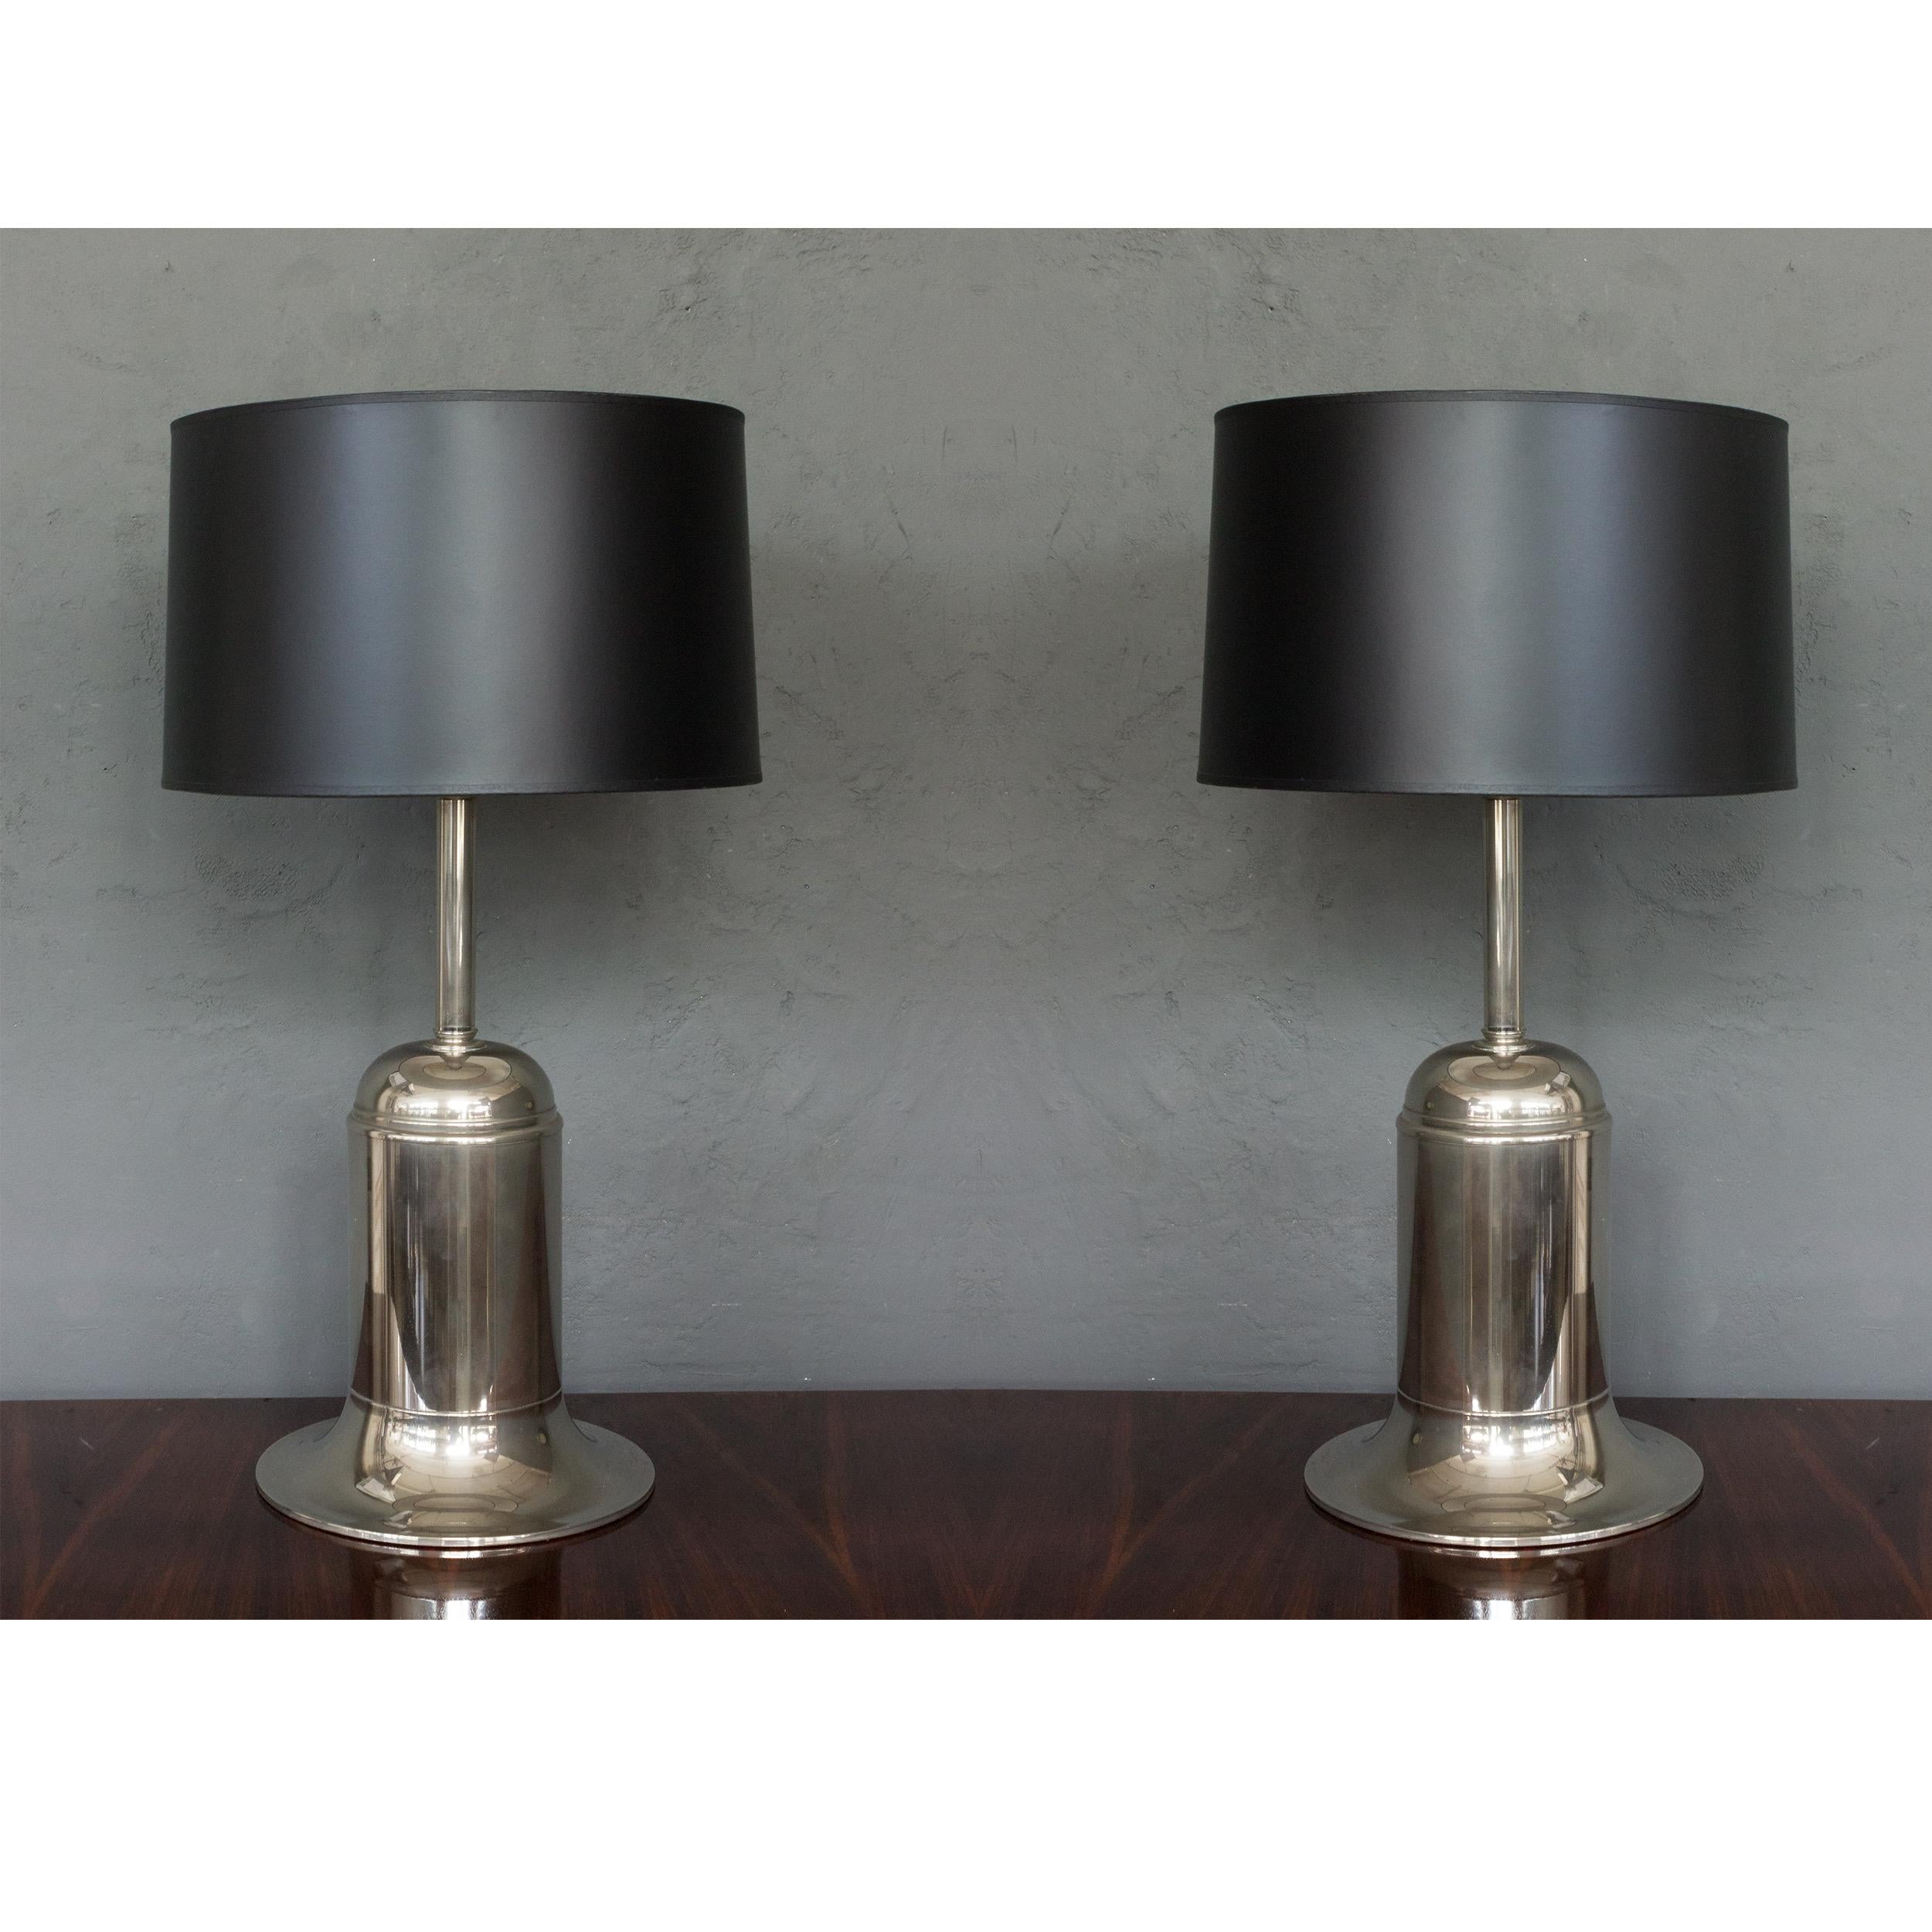 This sleek and modern pair of nickel-plated lamps hails from France in the 1970s. These lamps have recently undergone a meticulous polishing and rewiring, resulting in their excellent vintage condition. Standing at a height of 23 inches with bases